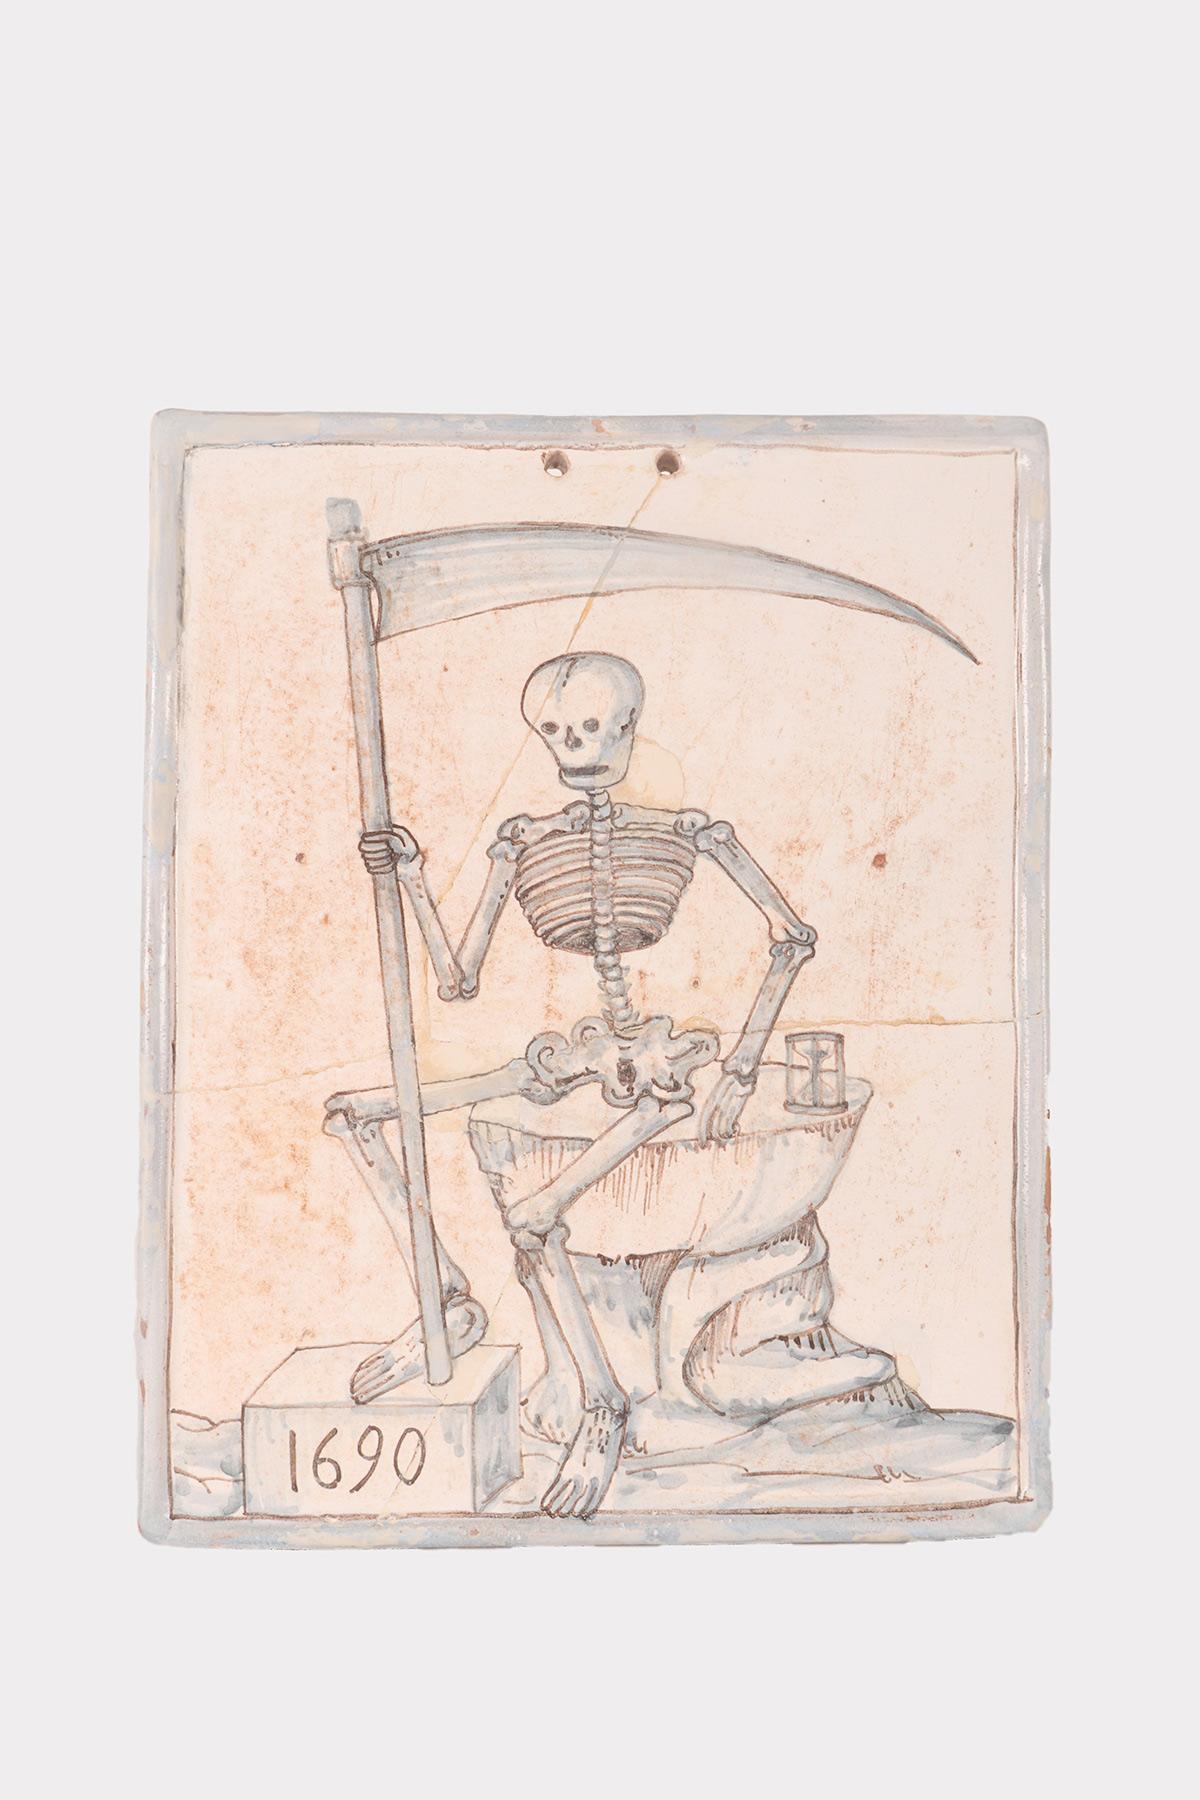 Memento Mori. A rare glazed terracotta tile with a blue painting on a white background, depicting a skeleton sitting on a rock with a scythe in his hand and an hourglass at his side. Naples, Italy 1690.